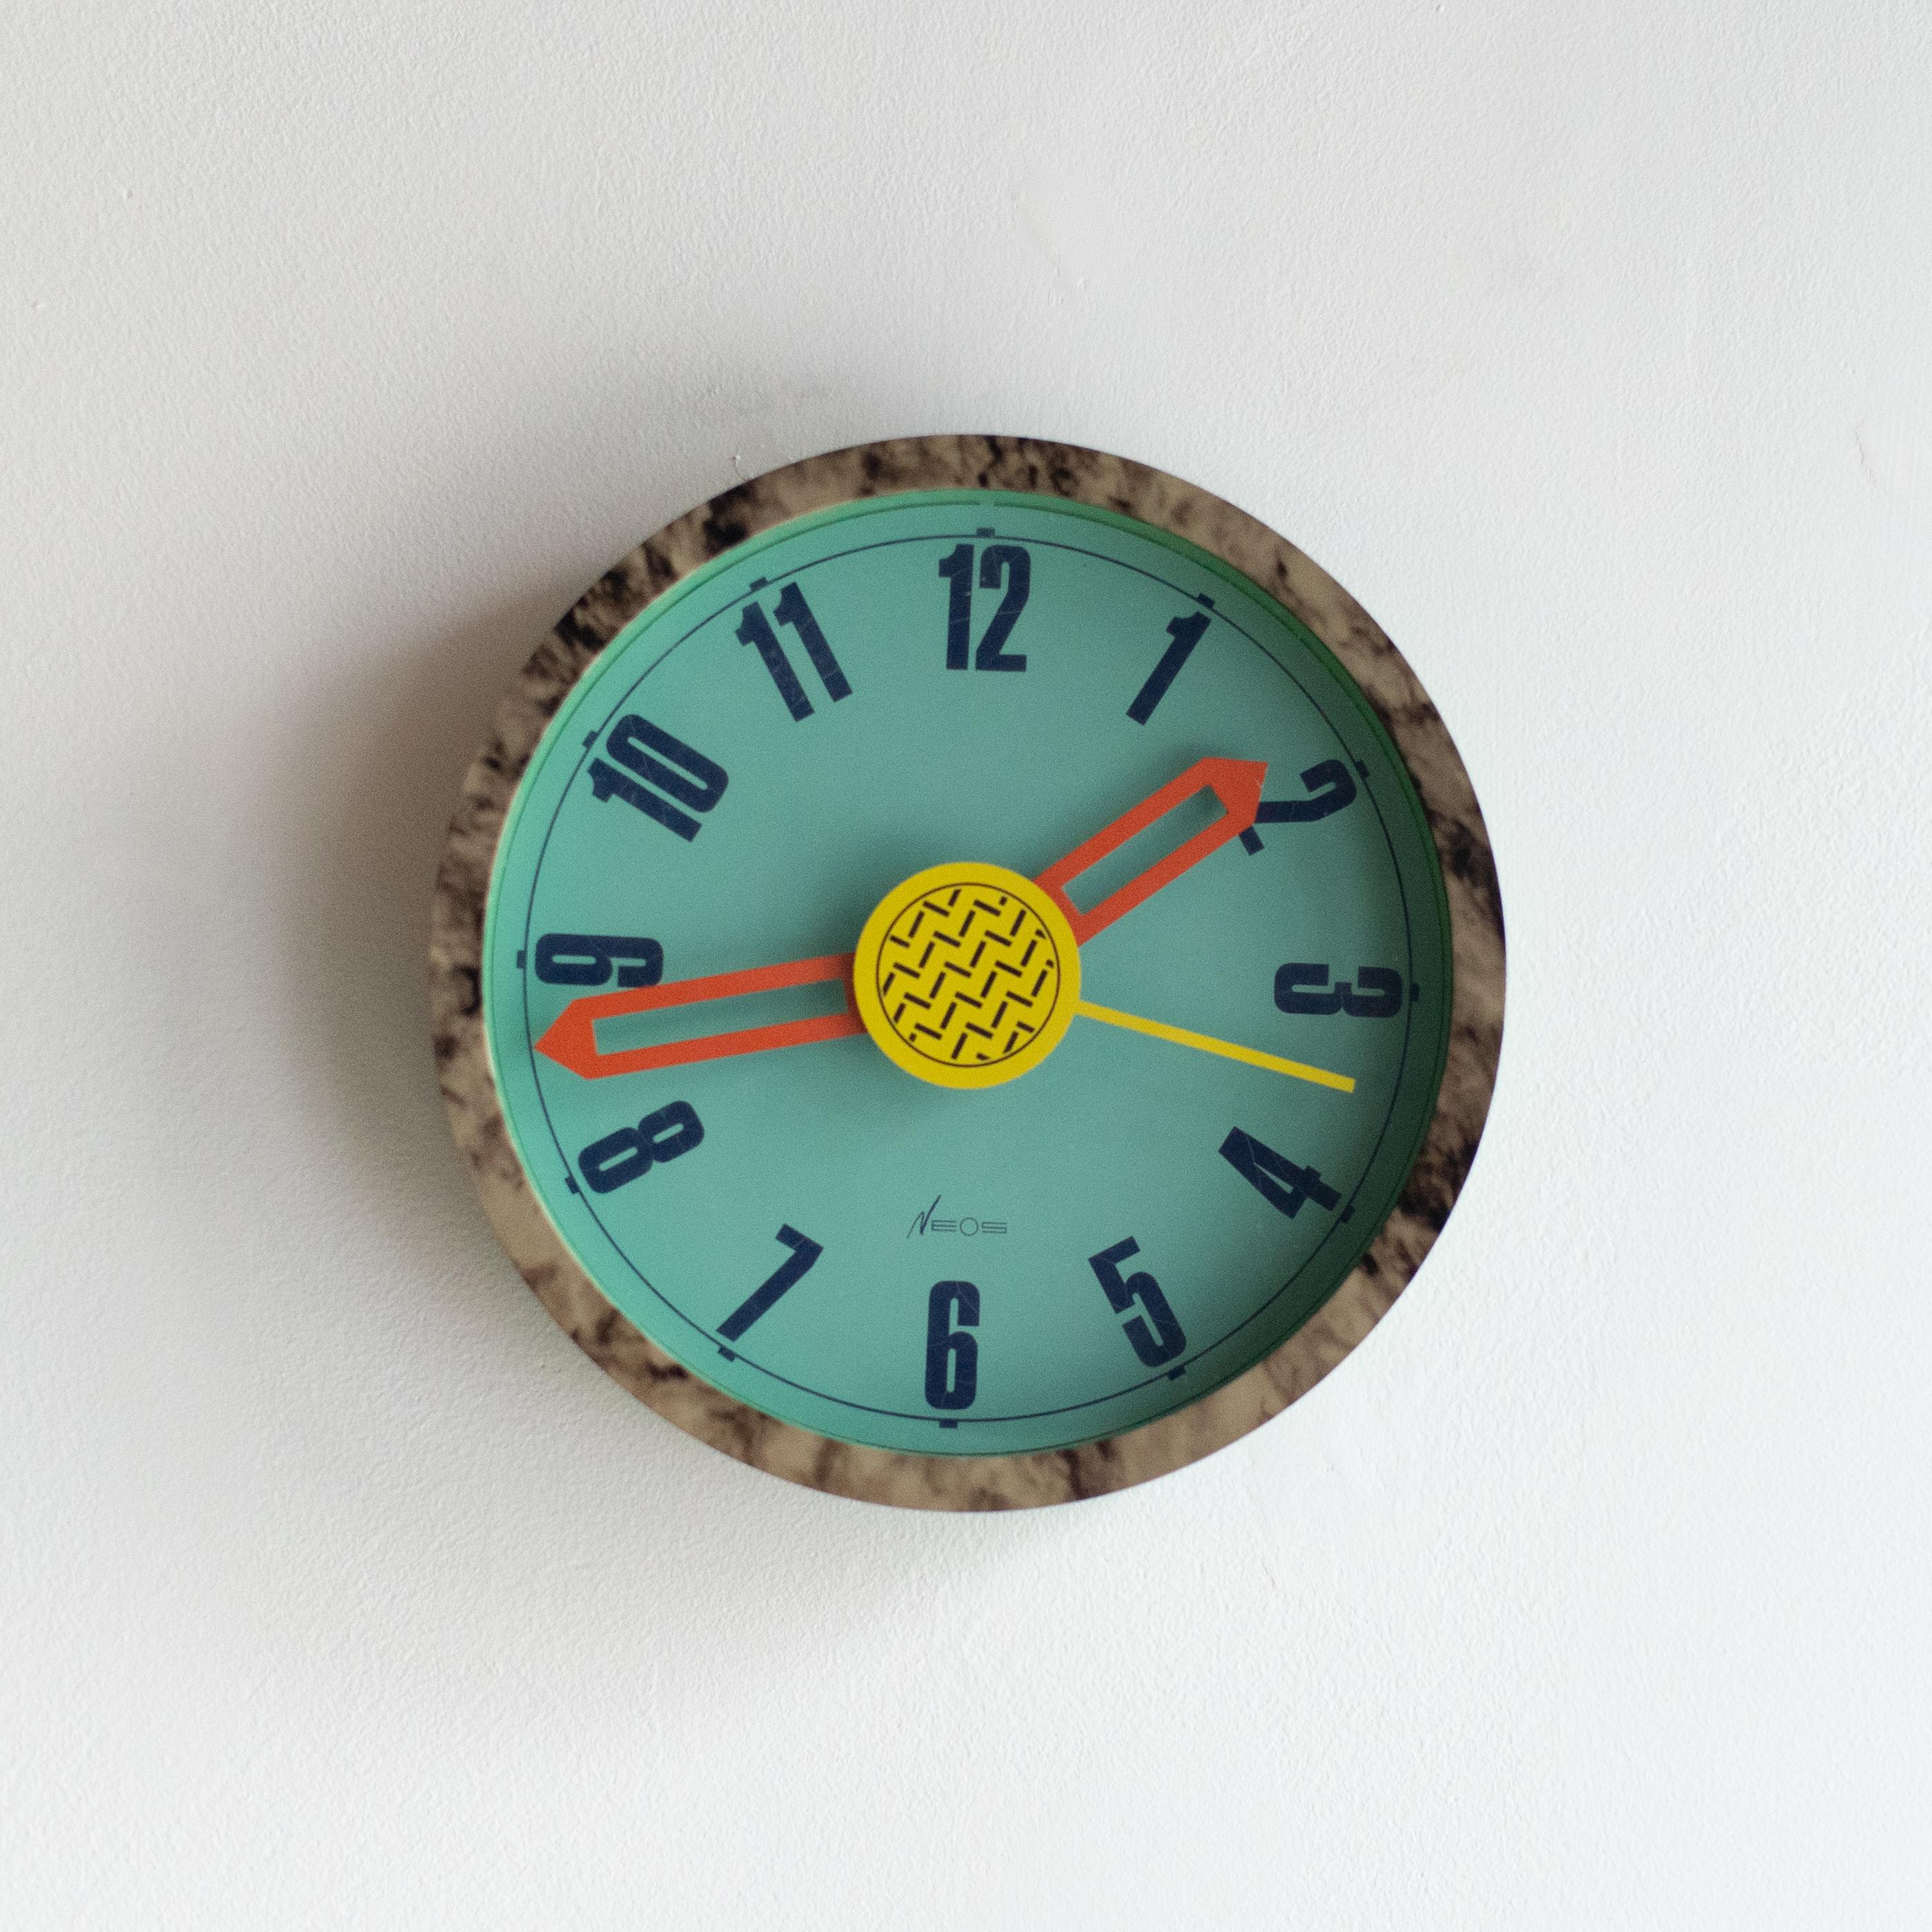 Neos clock designed by George Sowden and Nathalie du Pasquier in the 80s. Neos is the brand run by Lorenz clock company in Italy. They were designed a lot of clock and watch for this company in the 80s. 
Clocks are all Memphis style.

Working